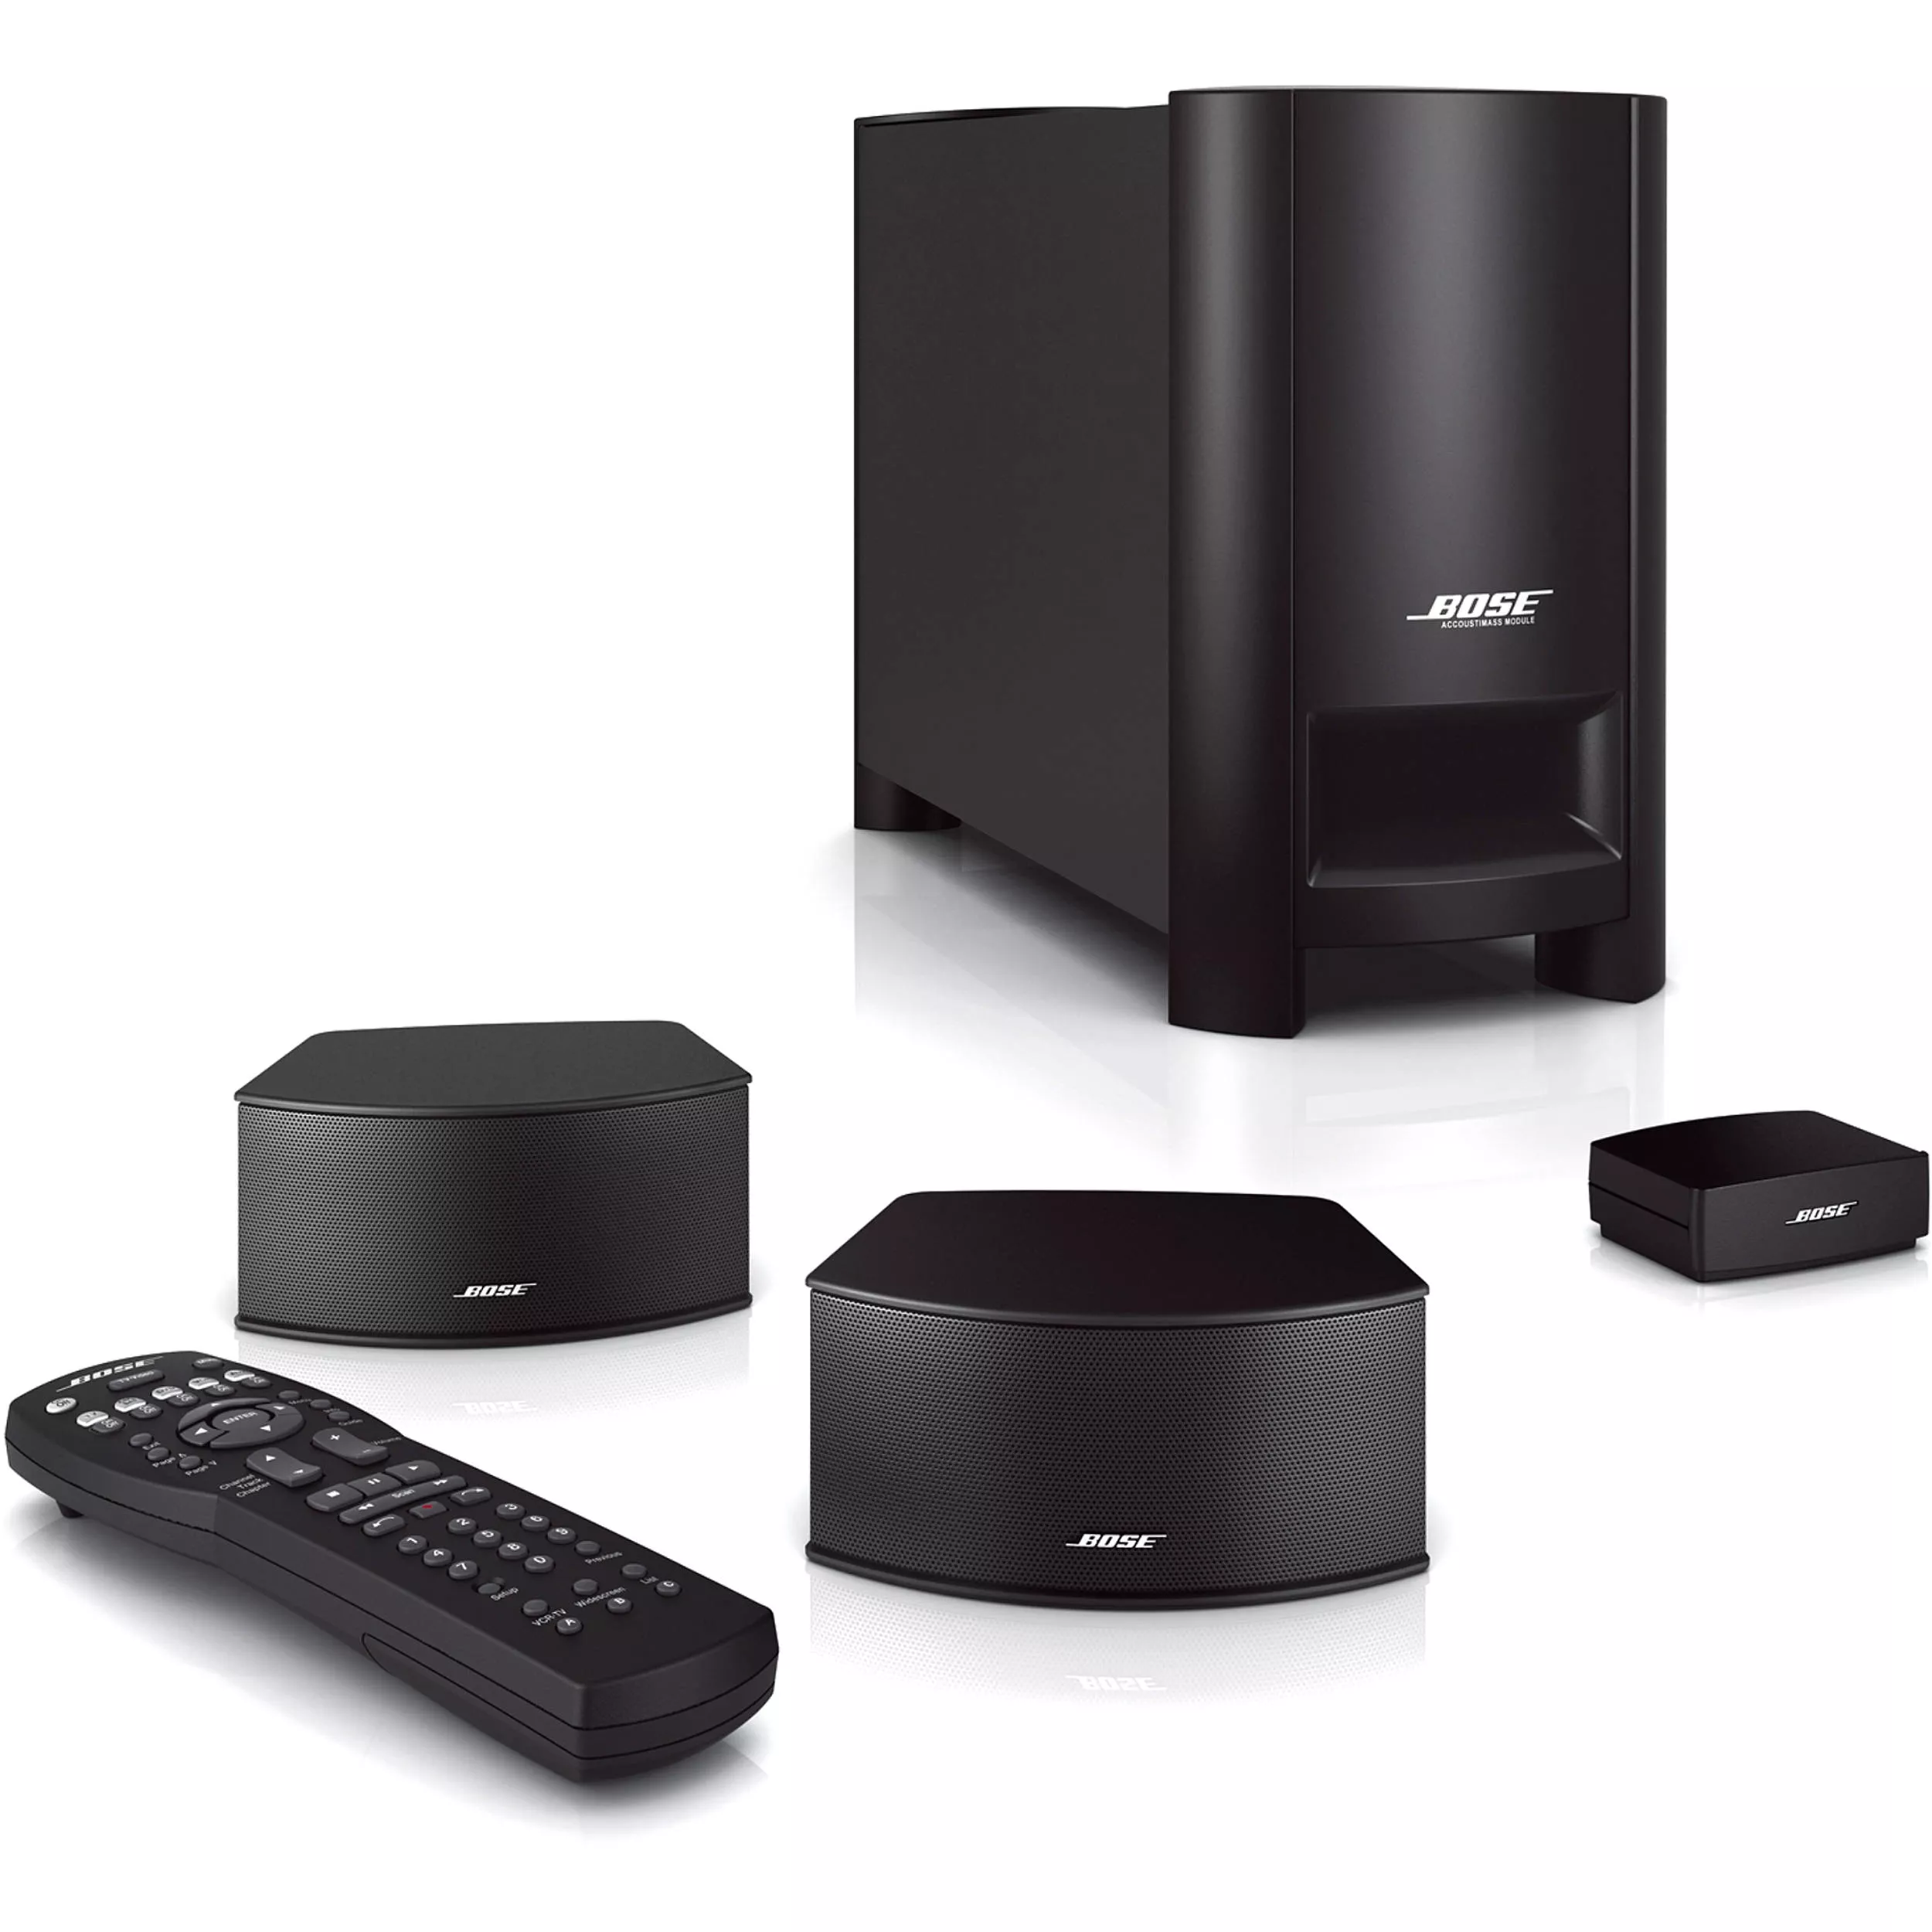 CineMate 220 home theater system, Bose Wikia